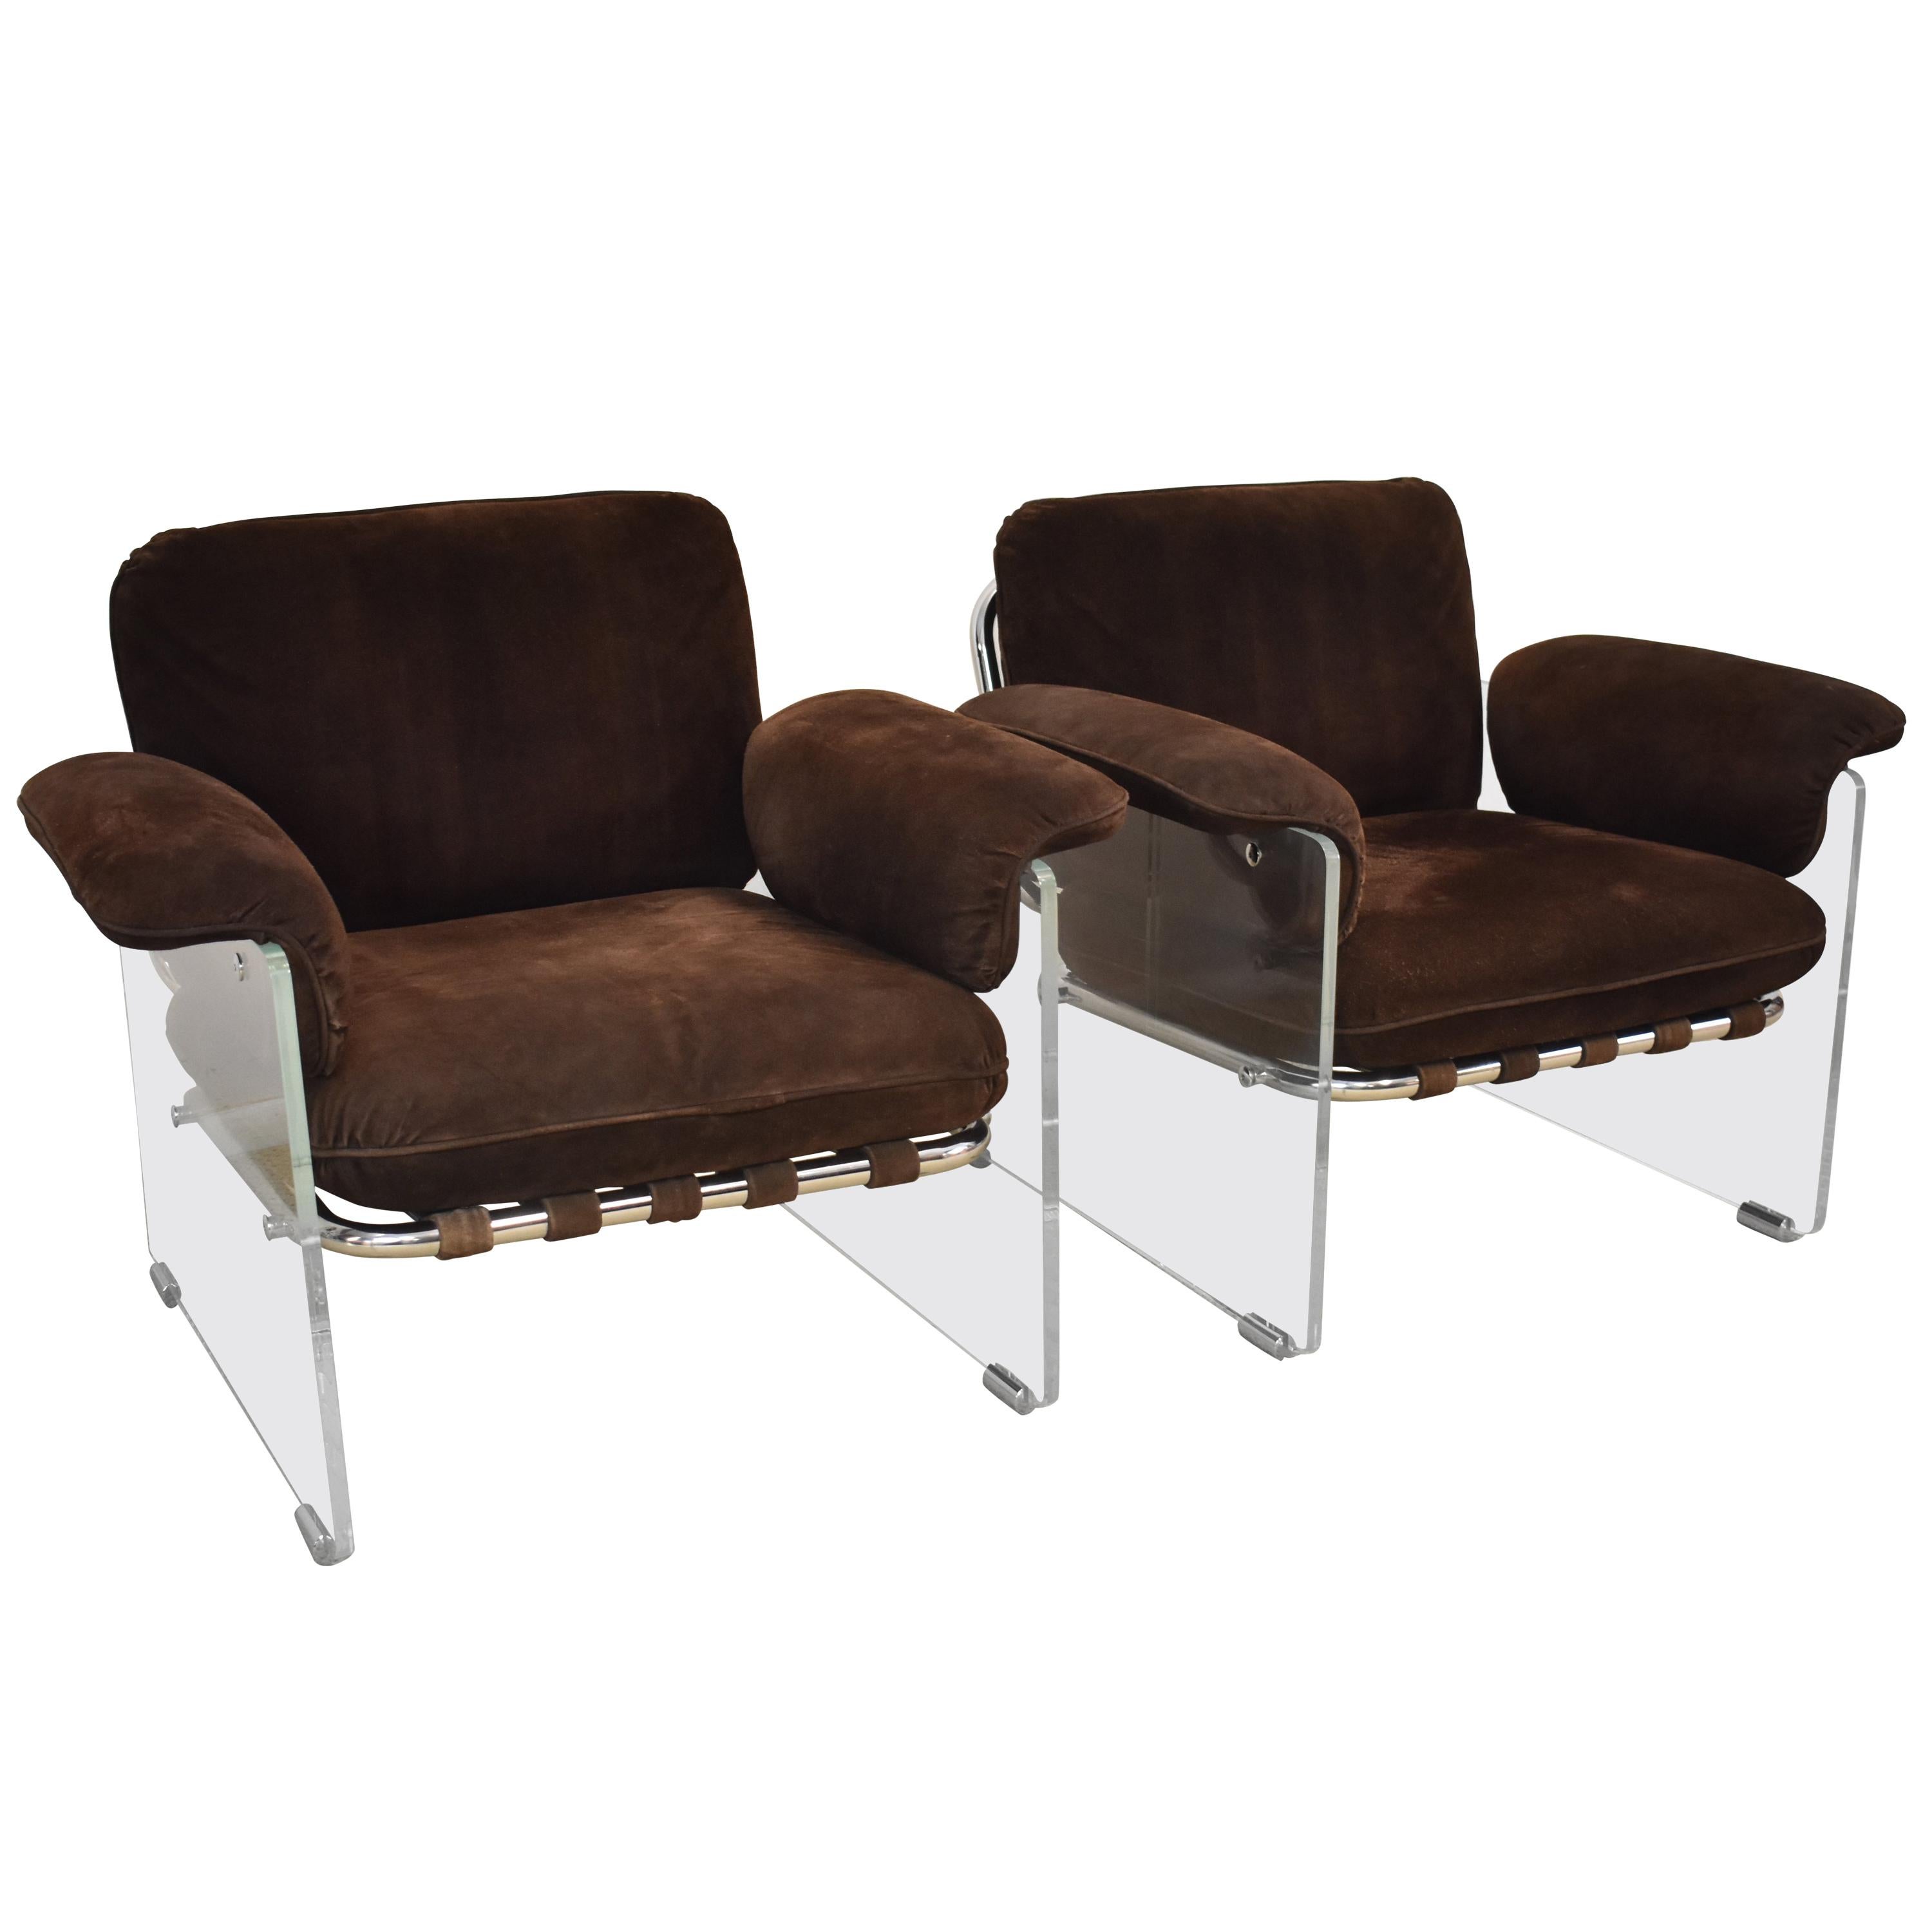 Pair of Pace Argenta Italian Suede, Lucite and Chrome Chairs